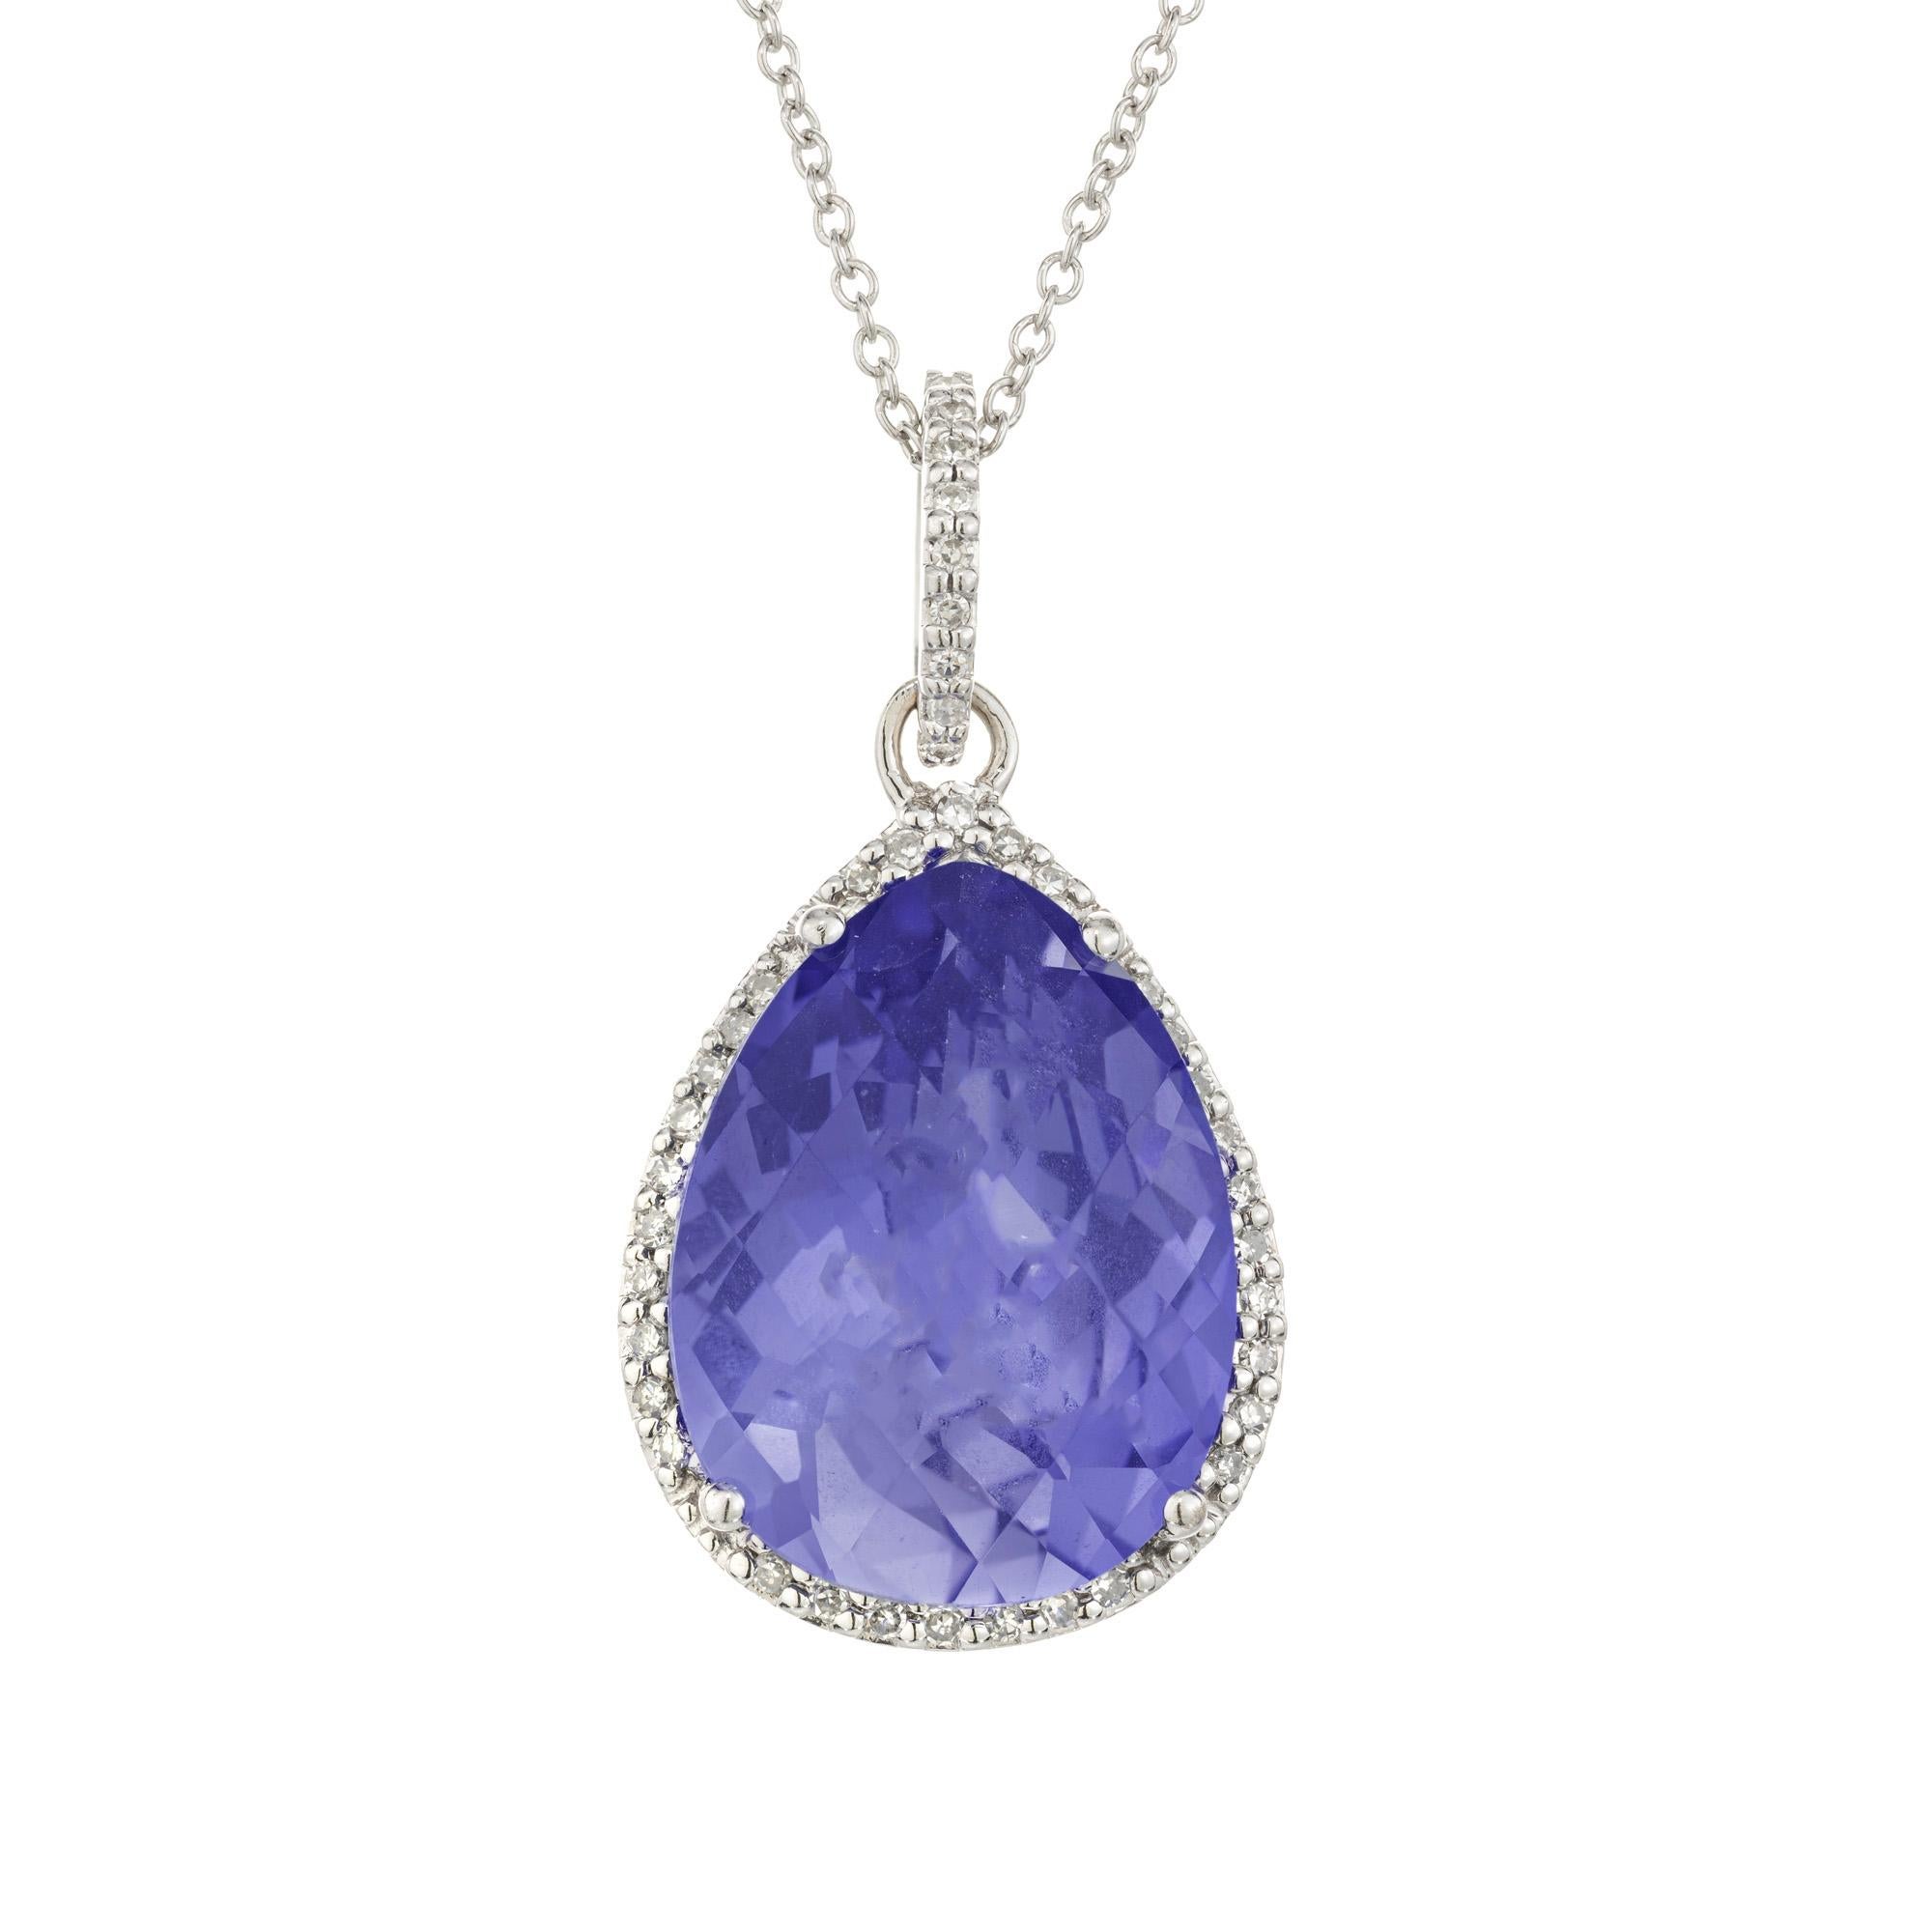 Exquisite tanzanite and diamond pendant necklace. This pendant begins with its center stone, a faceted pear shaped blue with purple hue 7.00ct tanzanite. Set in a 14k white gold setting, the tanzanite is framed with a halo of 42 single cut